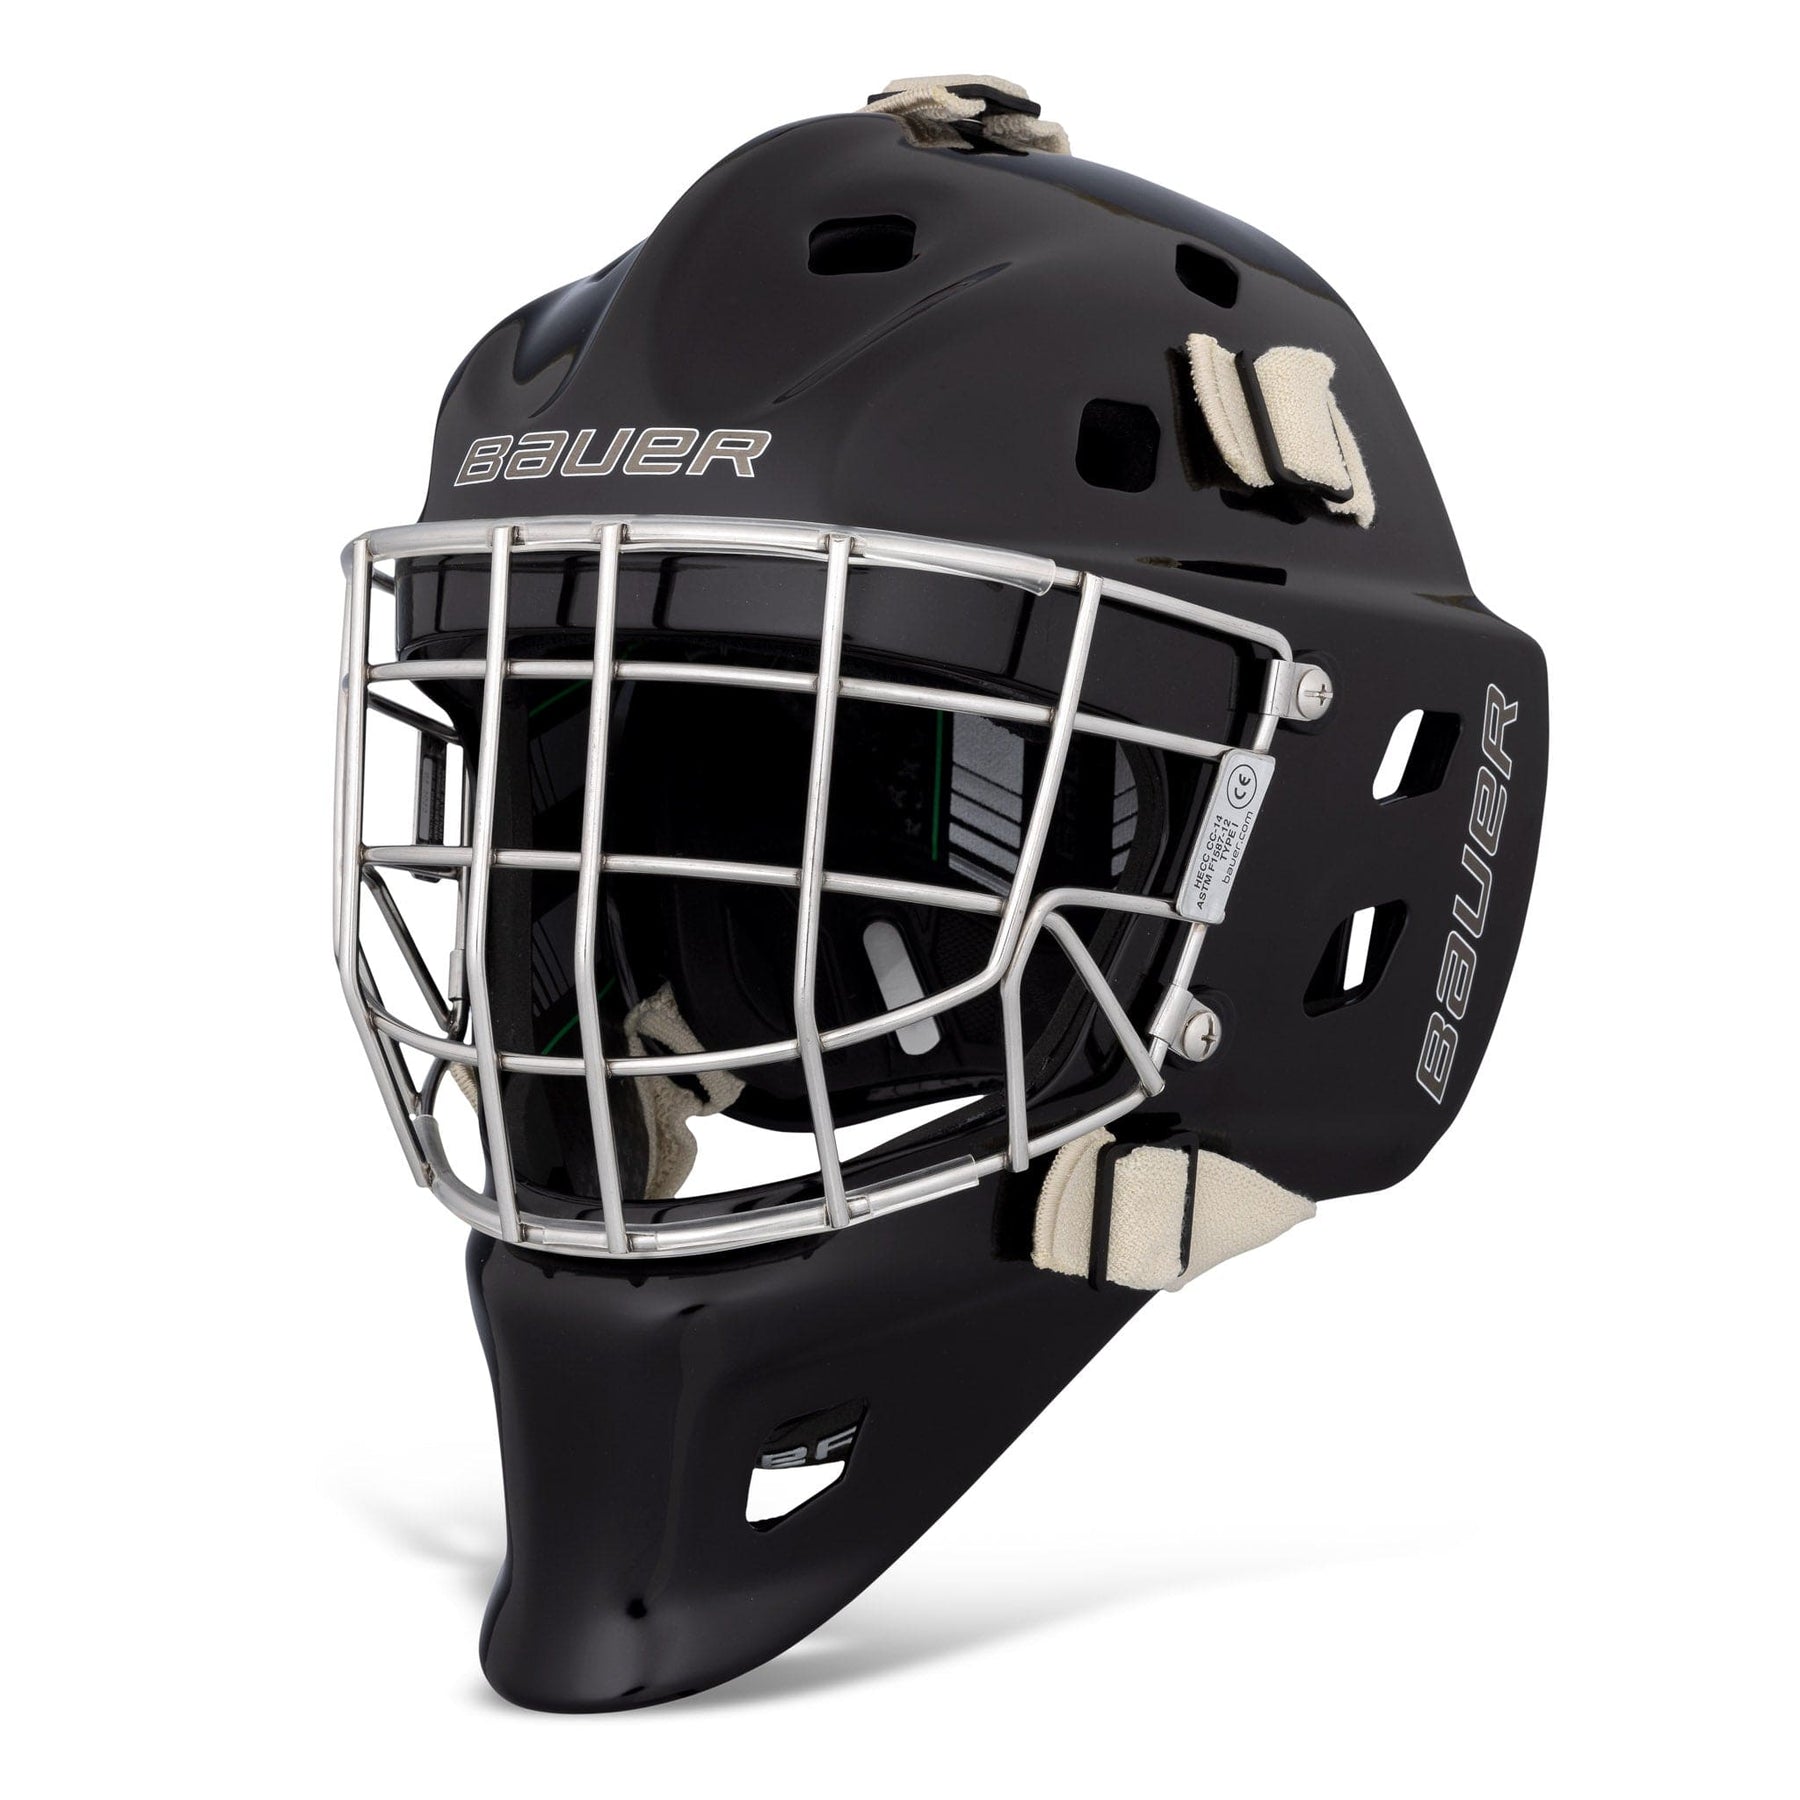 The Goalie Mask is 50 - Puck Junk